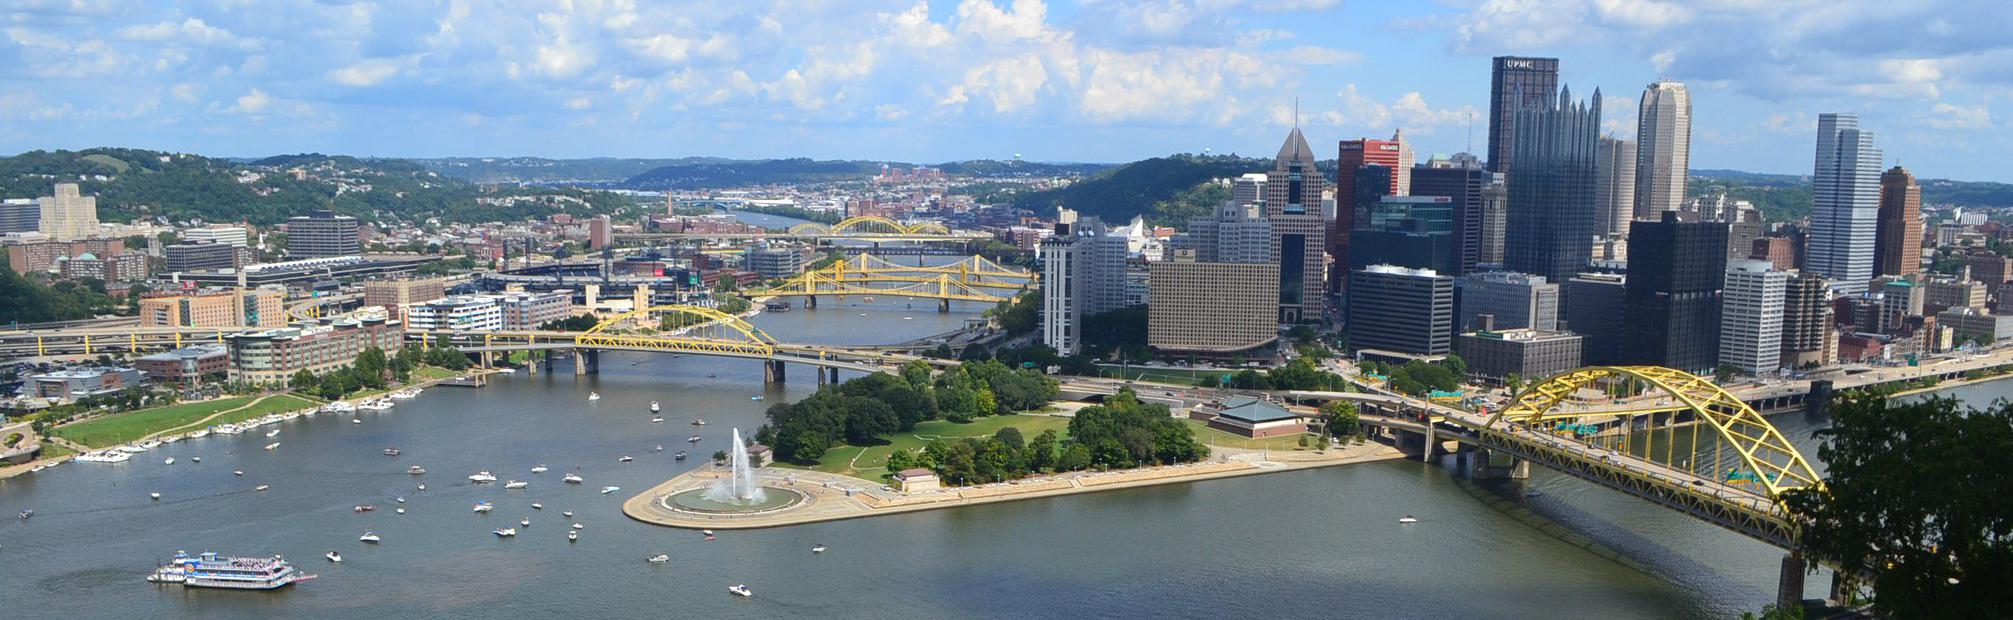 The River confluence in downtown pittsburgh